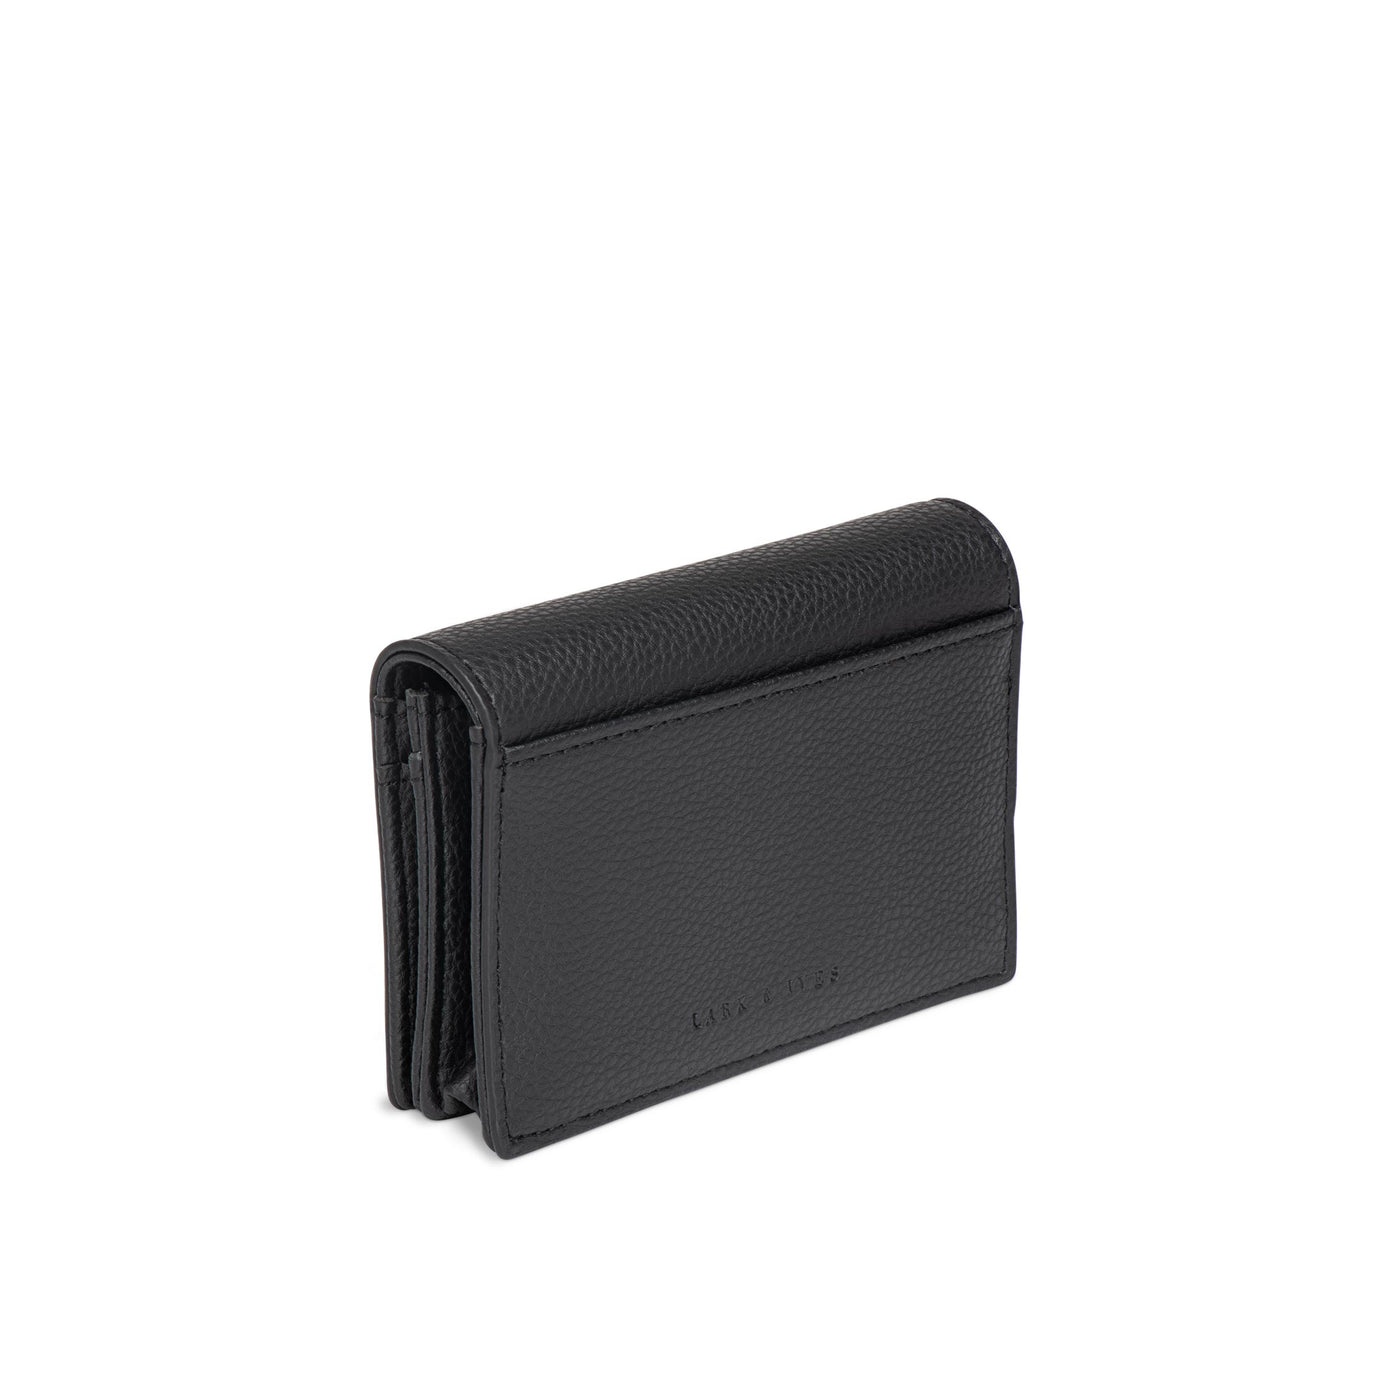 Lark and Ives / Vegan Leather Accessories / Small Accessories / Wallet / Mini Wallet / Card Case / Card Holder / Button snap closure / Fold Wallet / Black